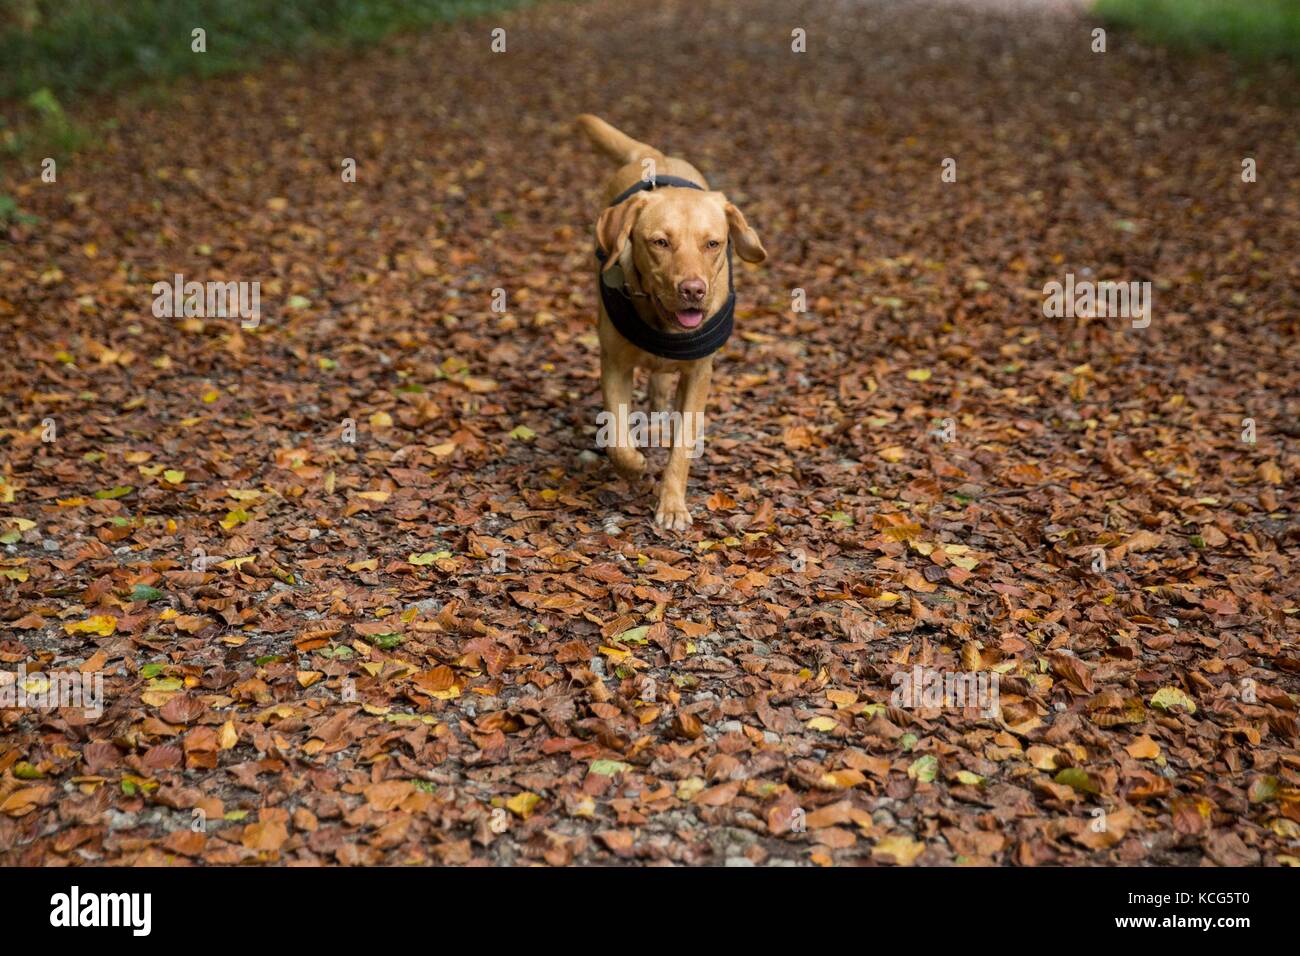 Hensol, Wales, UK, October 3rd 2017. Talisker the Fox Red Labrador takes a walk through fallen leaves in Hensol Forest, Vale of Glamorgan, Wales, UK. Stock Photo